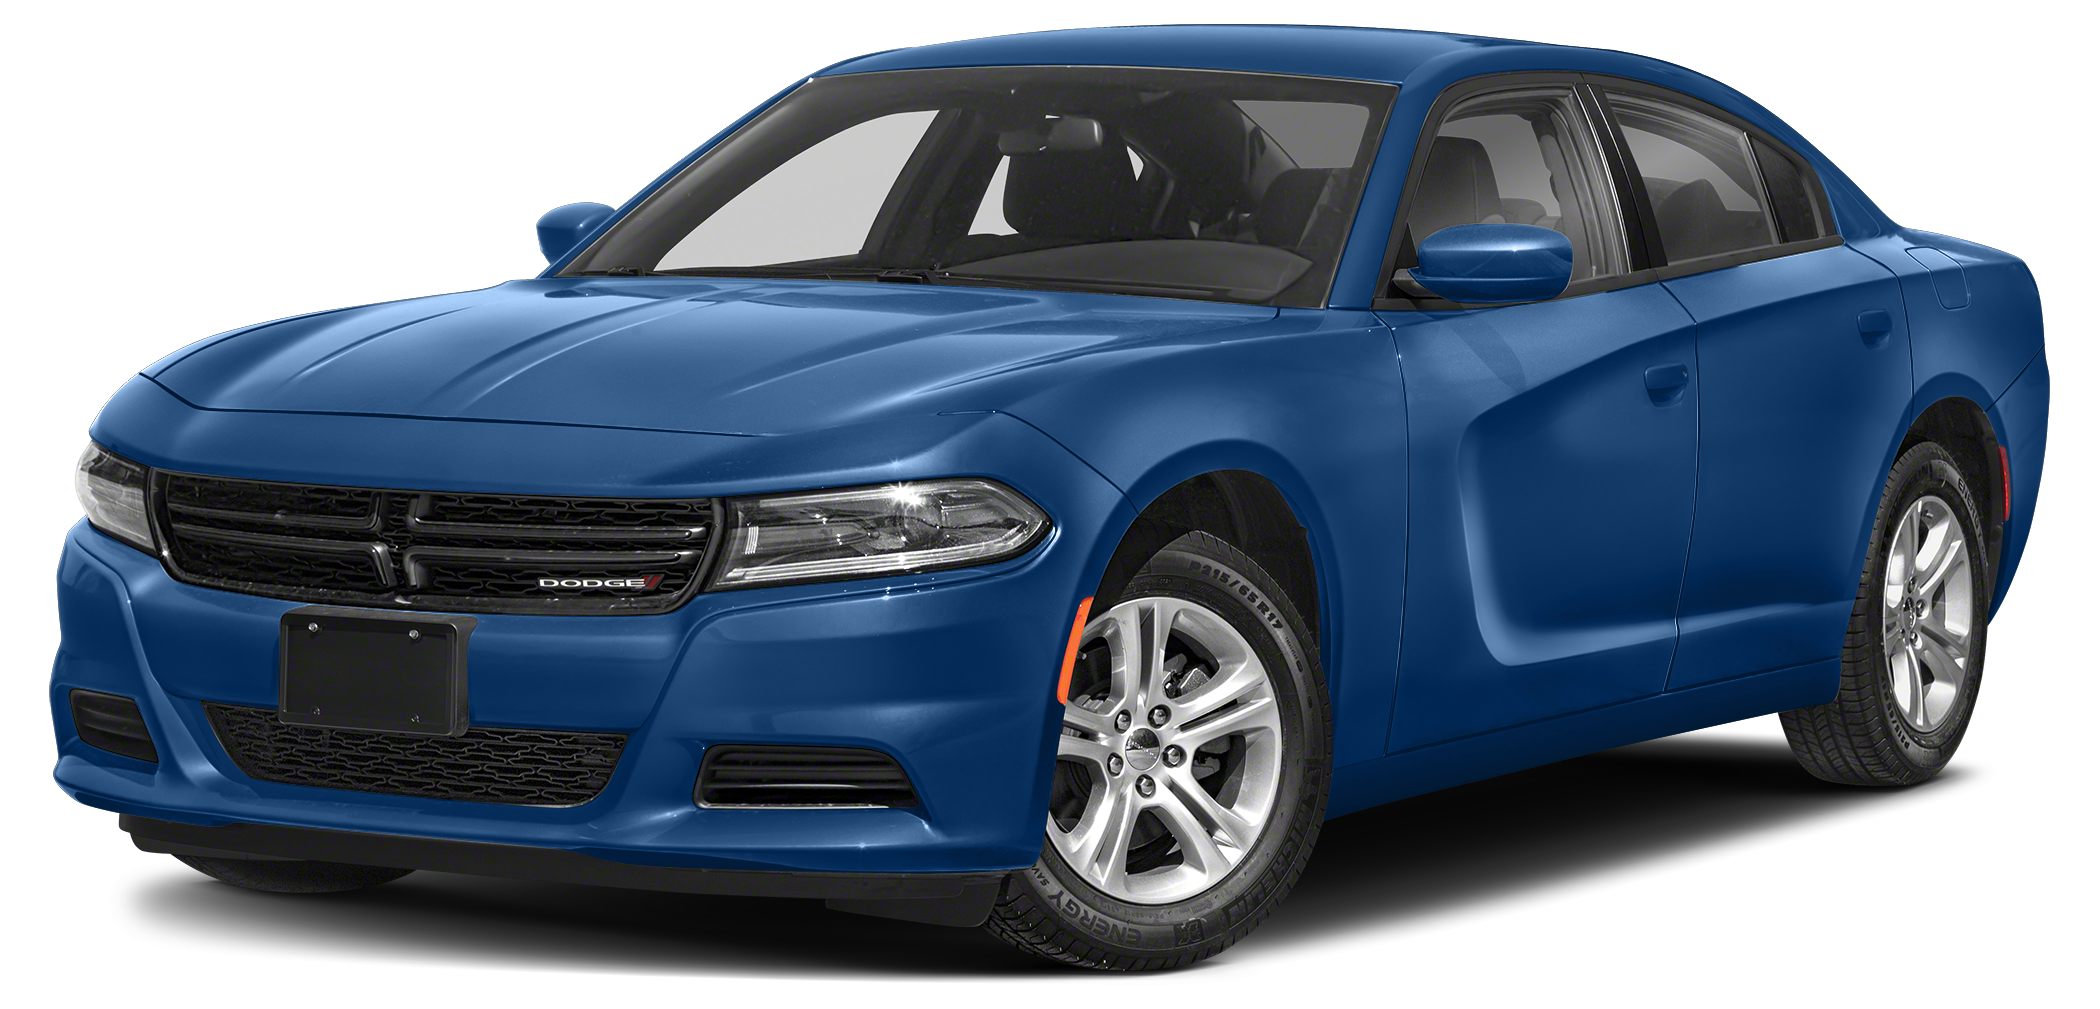 2023 Dodge Charger Specs Price MPG amp Reviews  Carscom